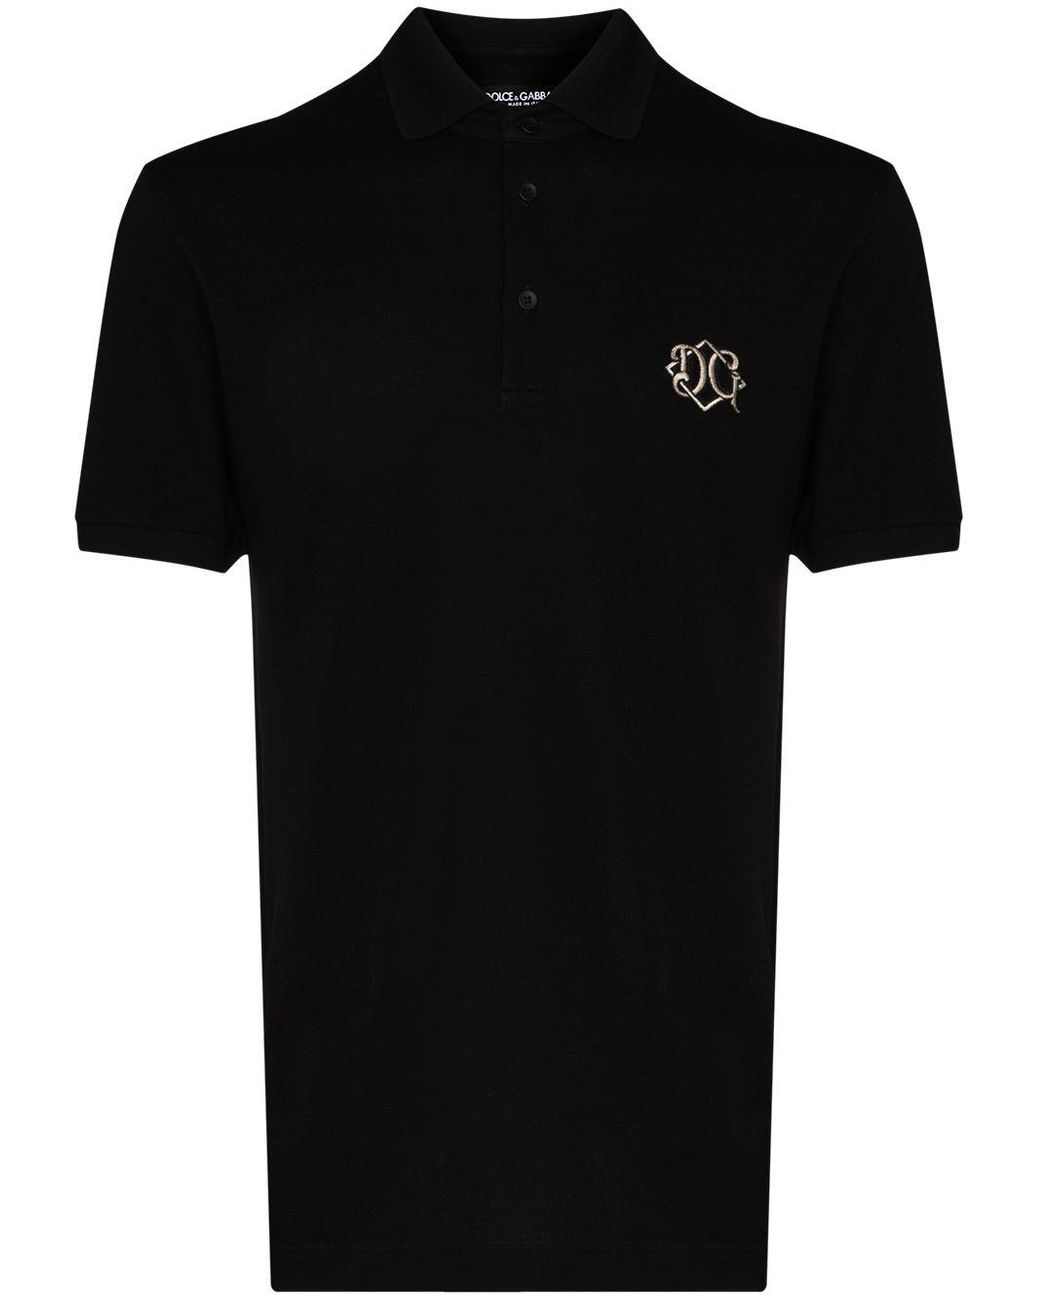 Dolce & Gabbana Embroidered Dg Logo Polo Shirt in Black for Men - Save ...